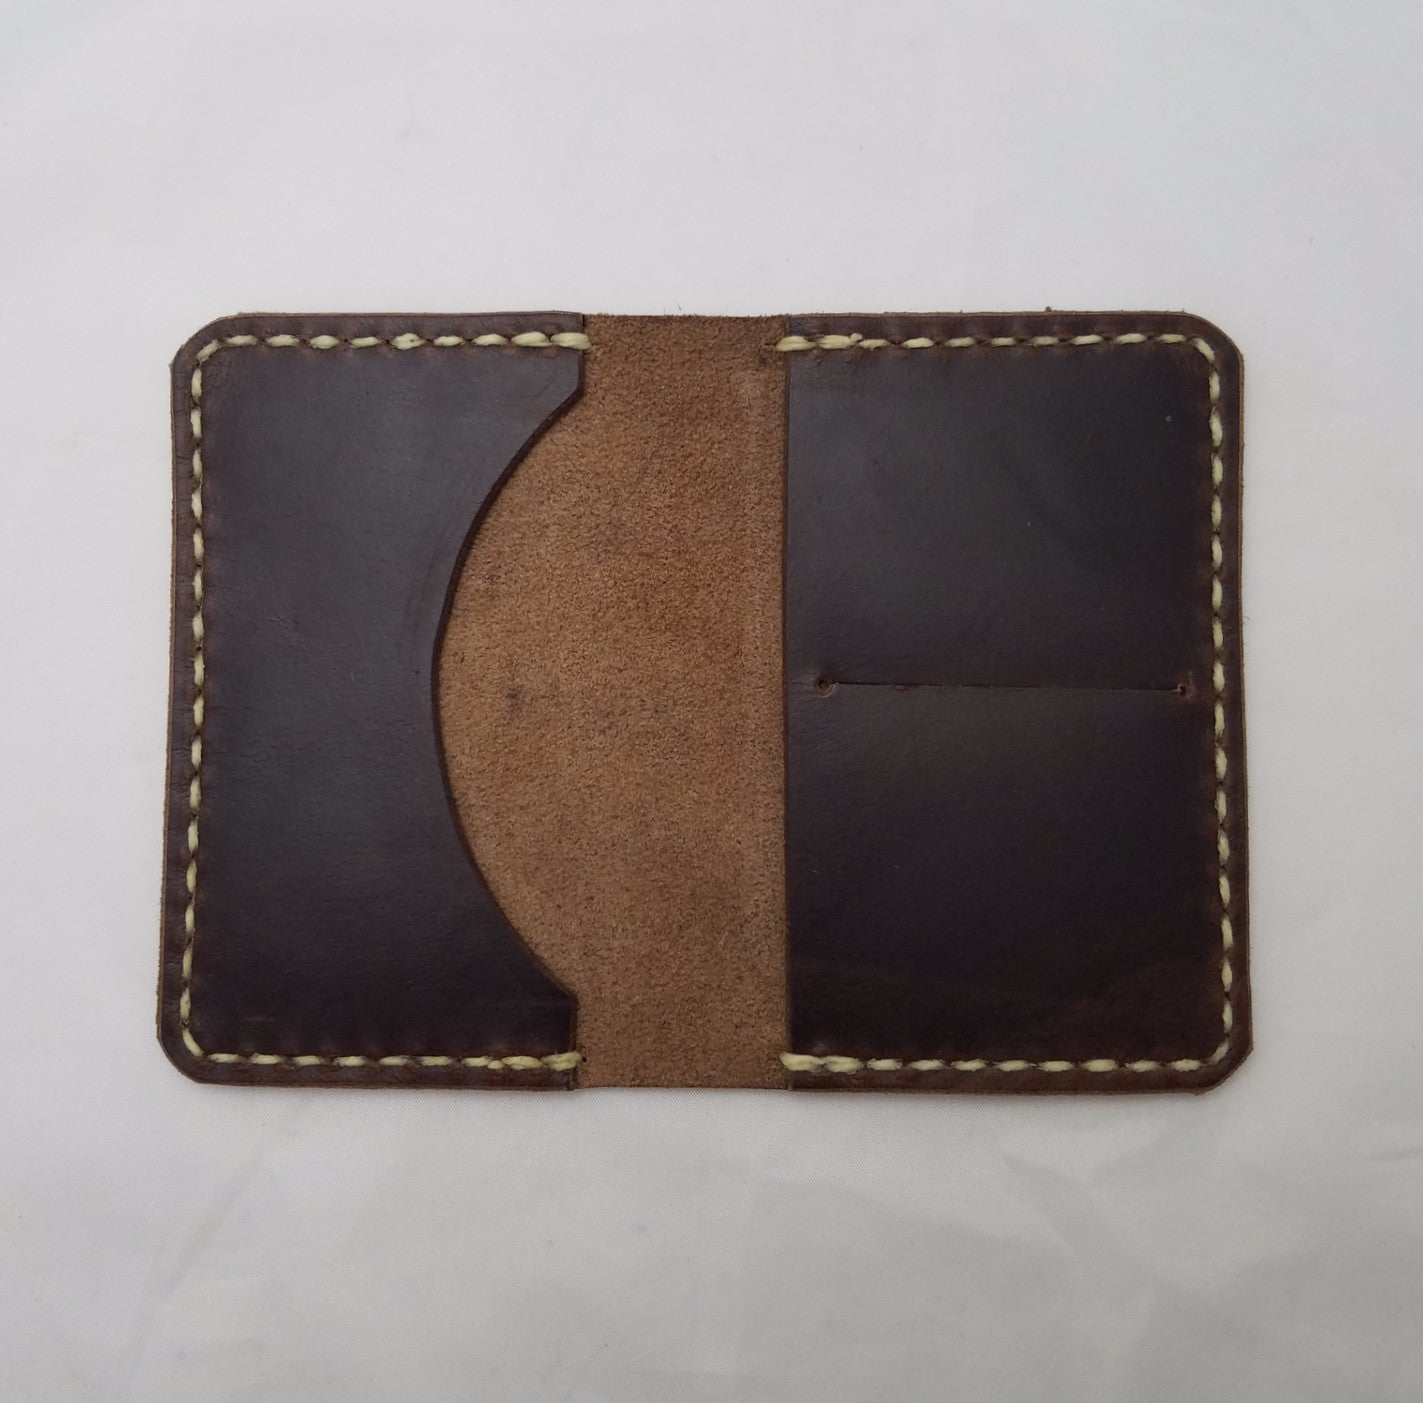 Tannery South Leather Co. Small Key Clip Havana Brown Chromexcel